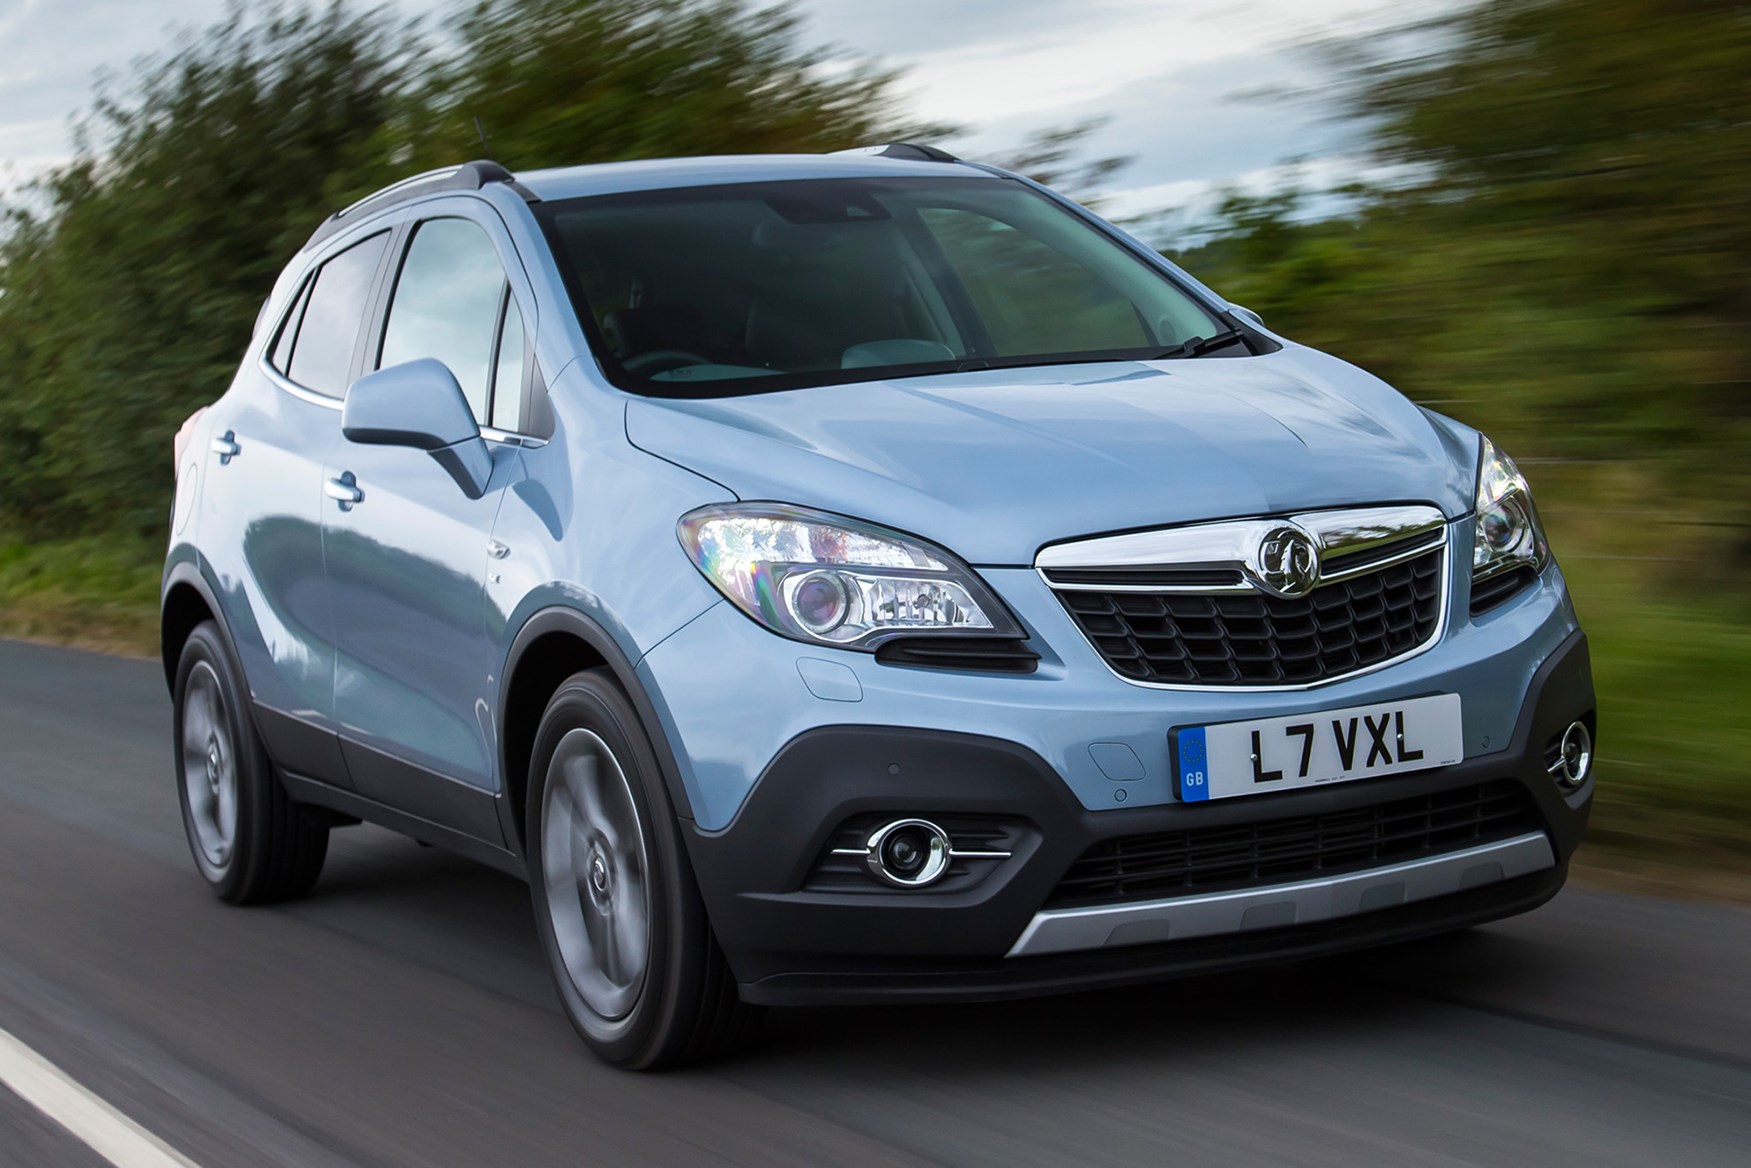 Vauxhall Mokka used car buying guide | Parkers